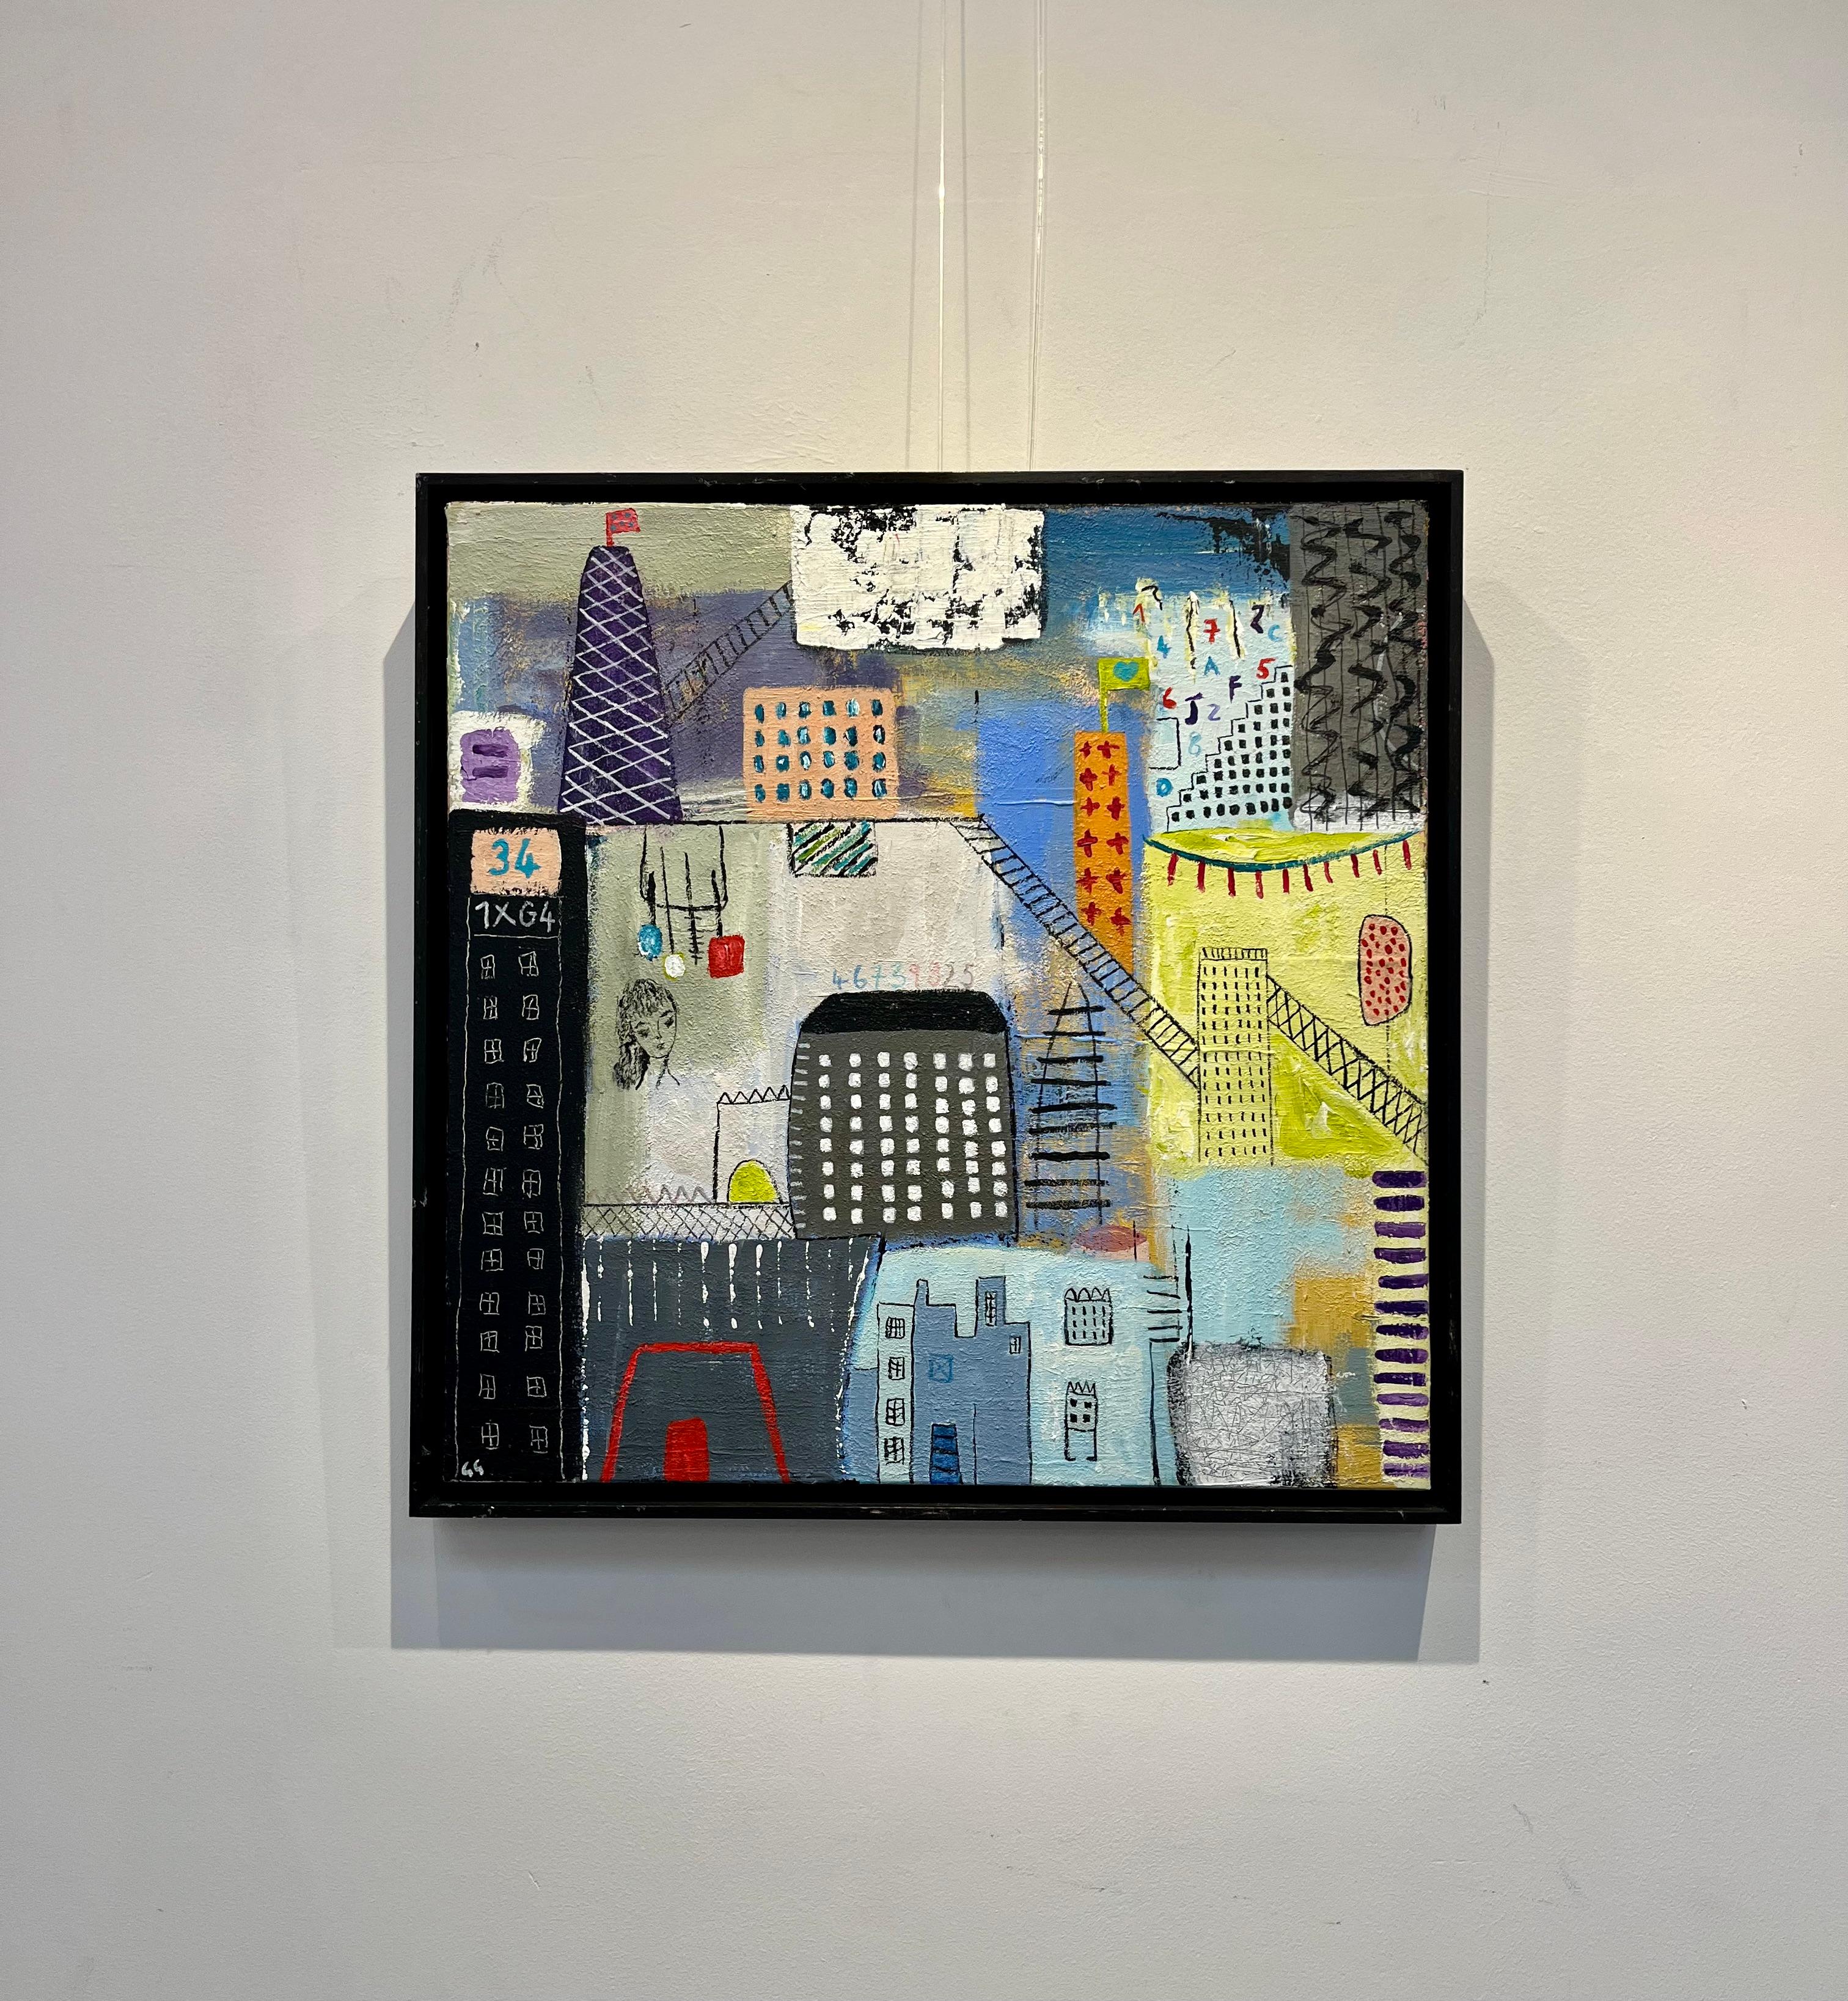 Number 34 - Bright, Playful Contemporary Art: Mixed Media on Canvas - Painting by Gohar Goddard